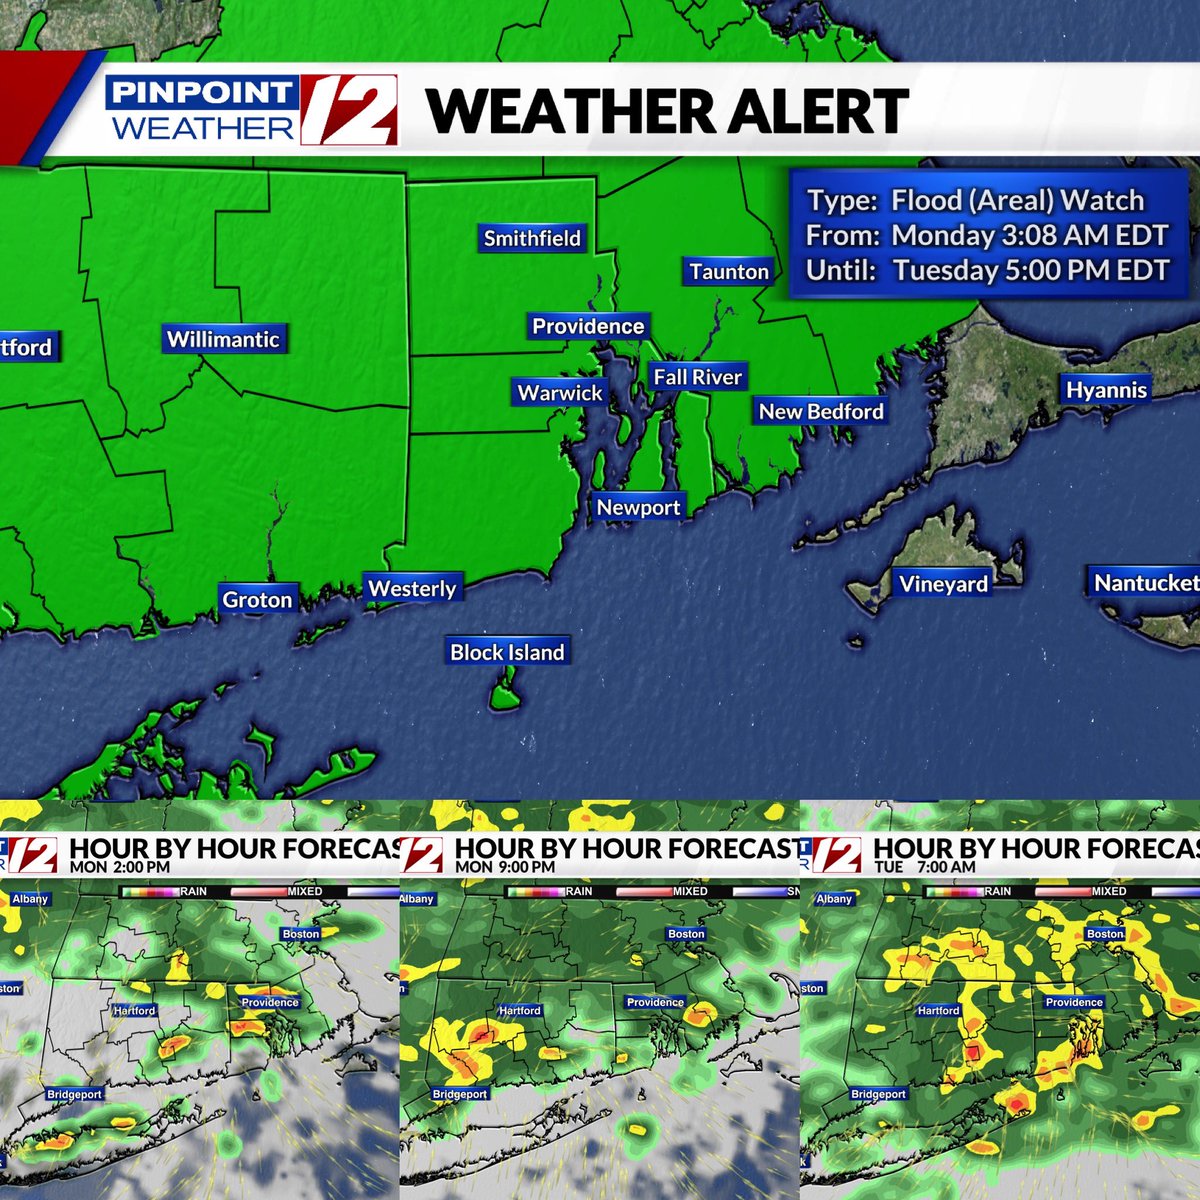 Rainy weather is expected through Tuesday with a Flood Watch in effect. We need the rain and some areas could get 1-3” with locally higher amounts. Timing it all out on 12 News This Morning @wpri12